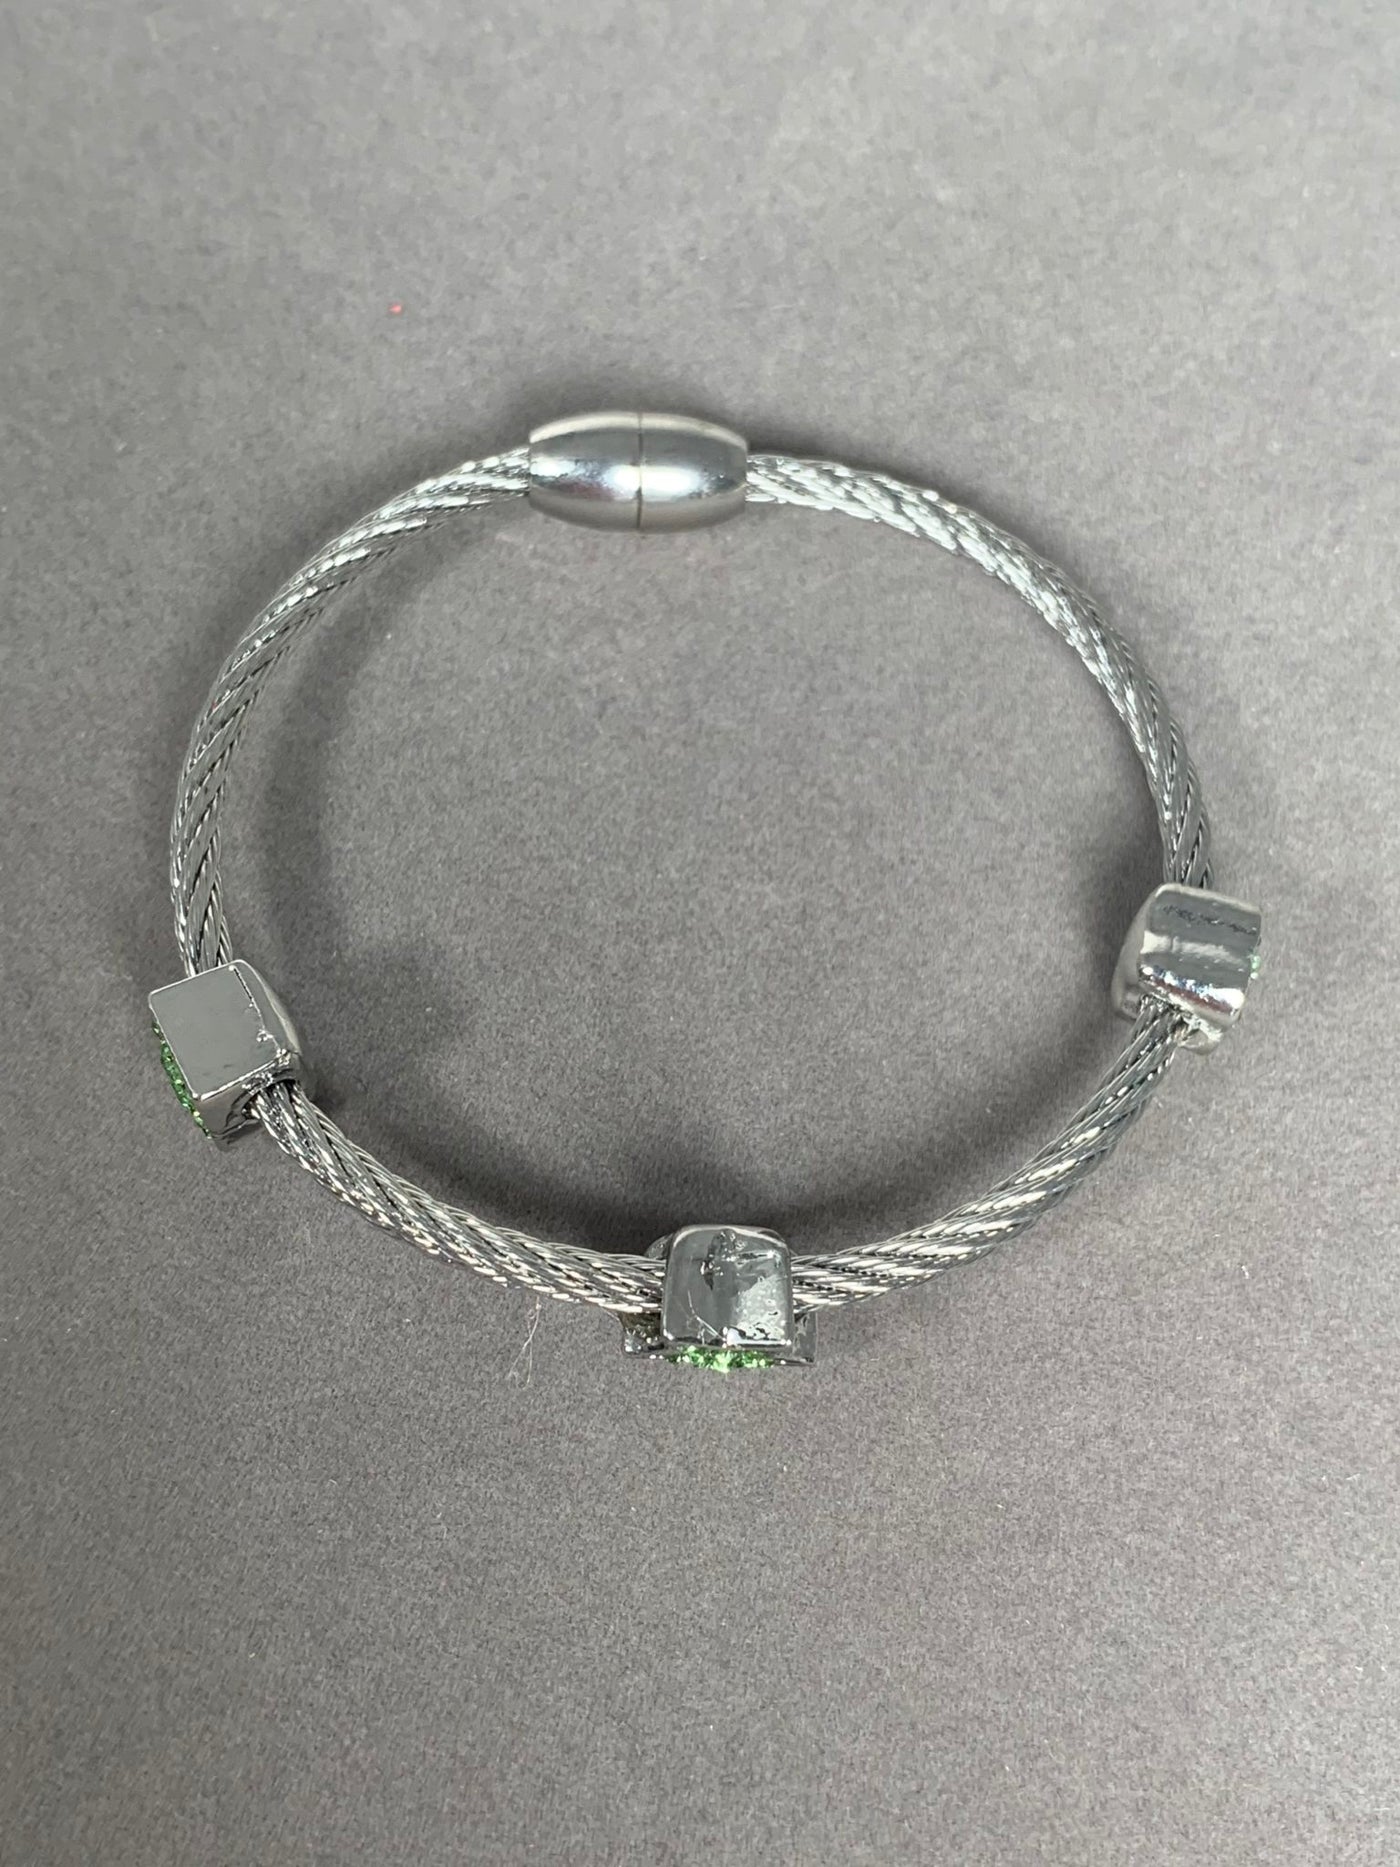 Silver Tone Wire Bangle Bracelet with 3 Green Crystal Heart Motifs